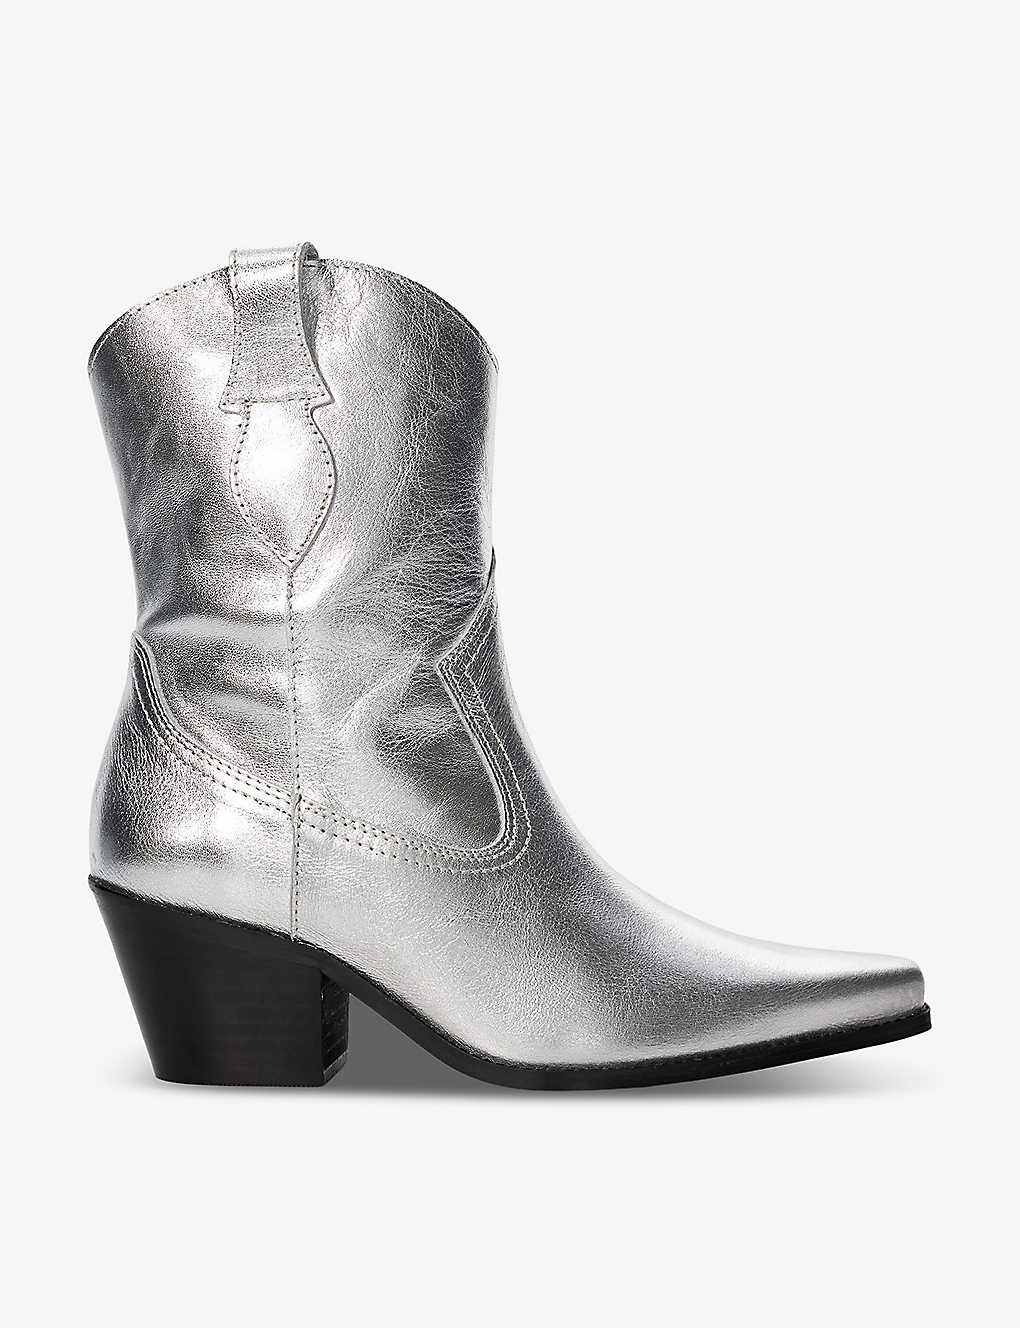 Dune Womens Silver-leather Pardner Metallic Leather Heeled Cowboy Boots